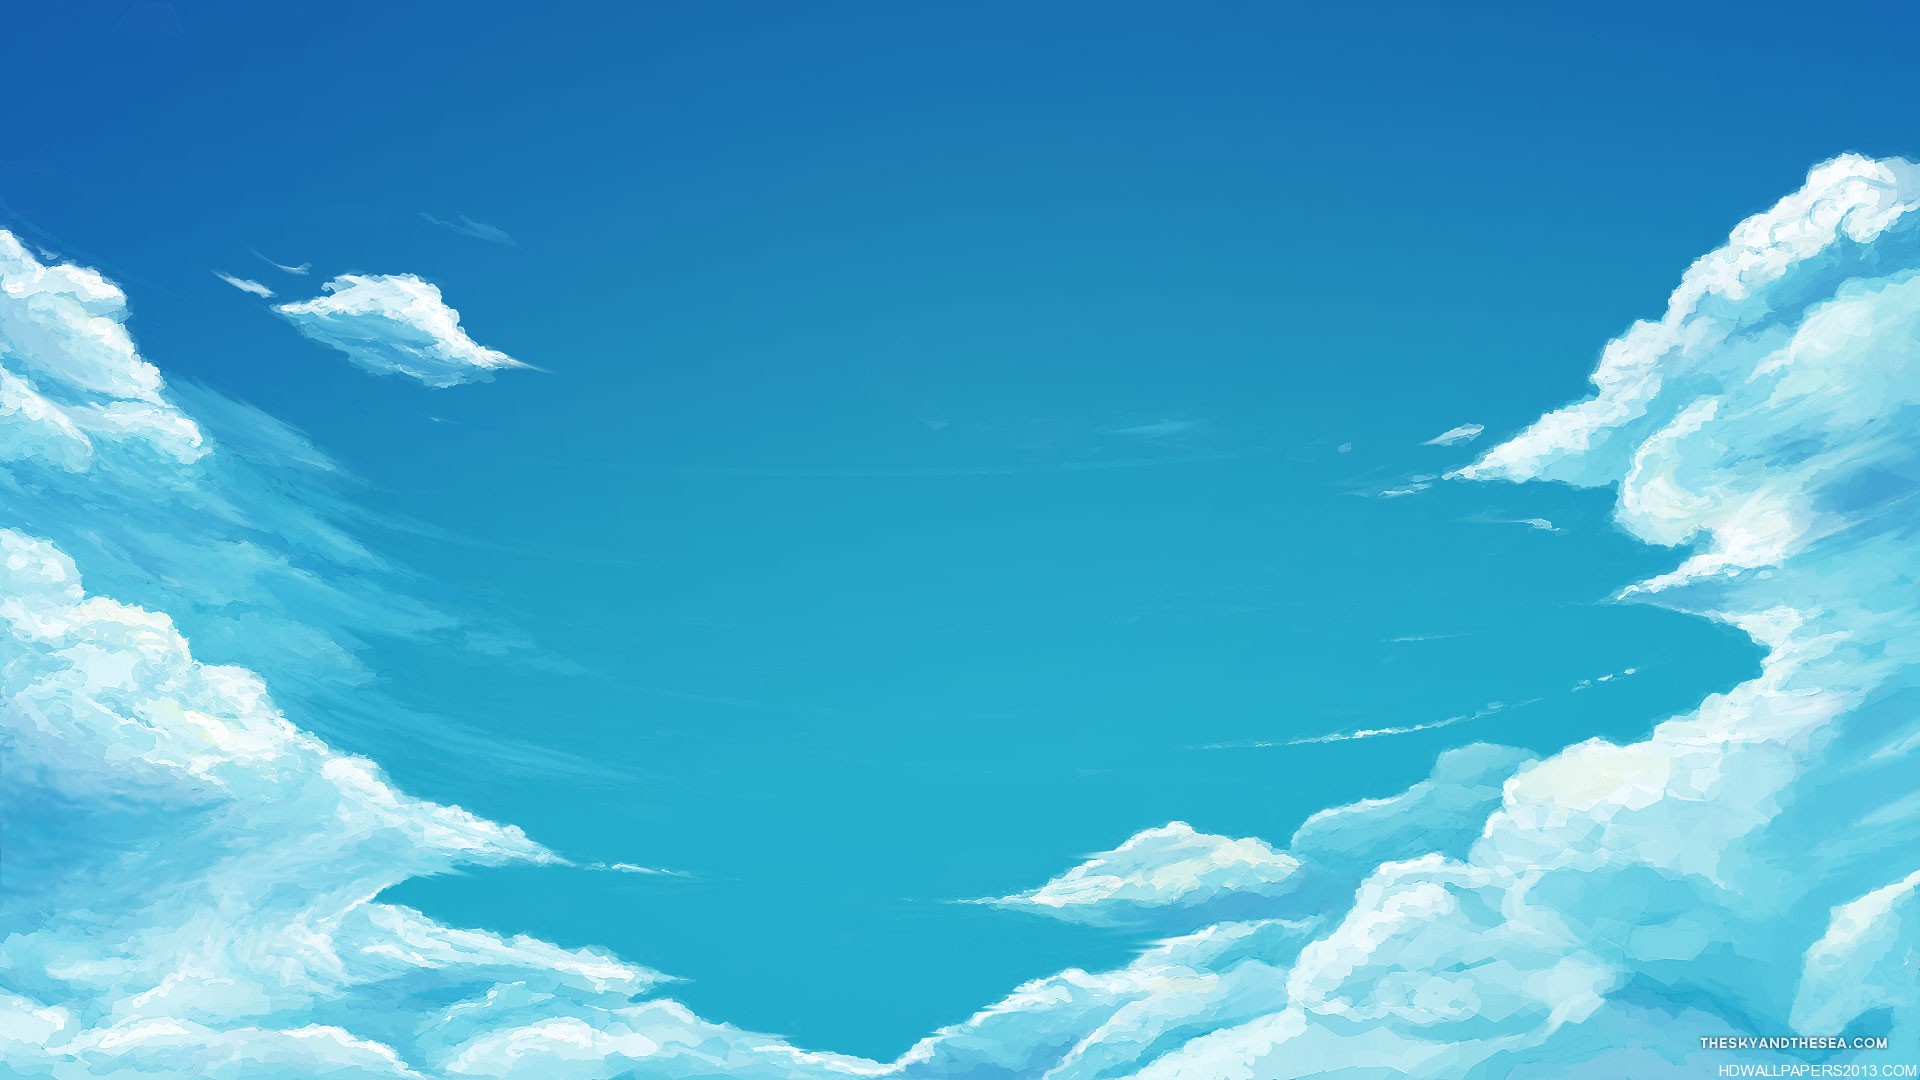 Light Blue Sky With Clouds